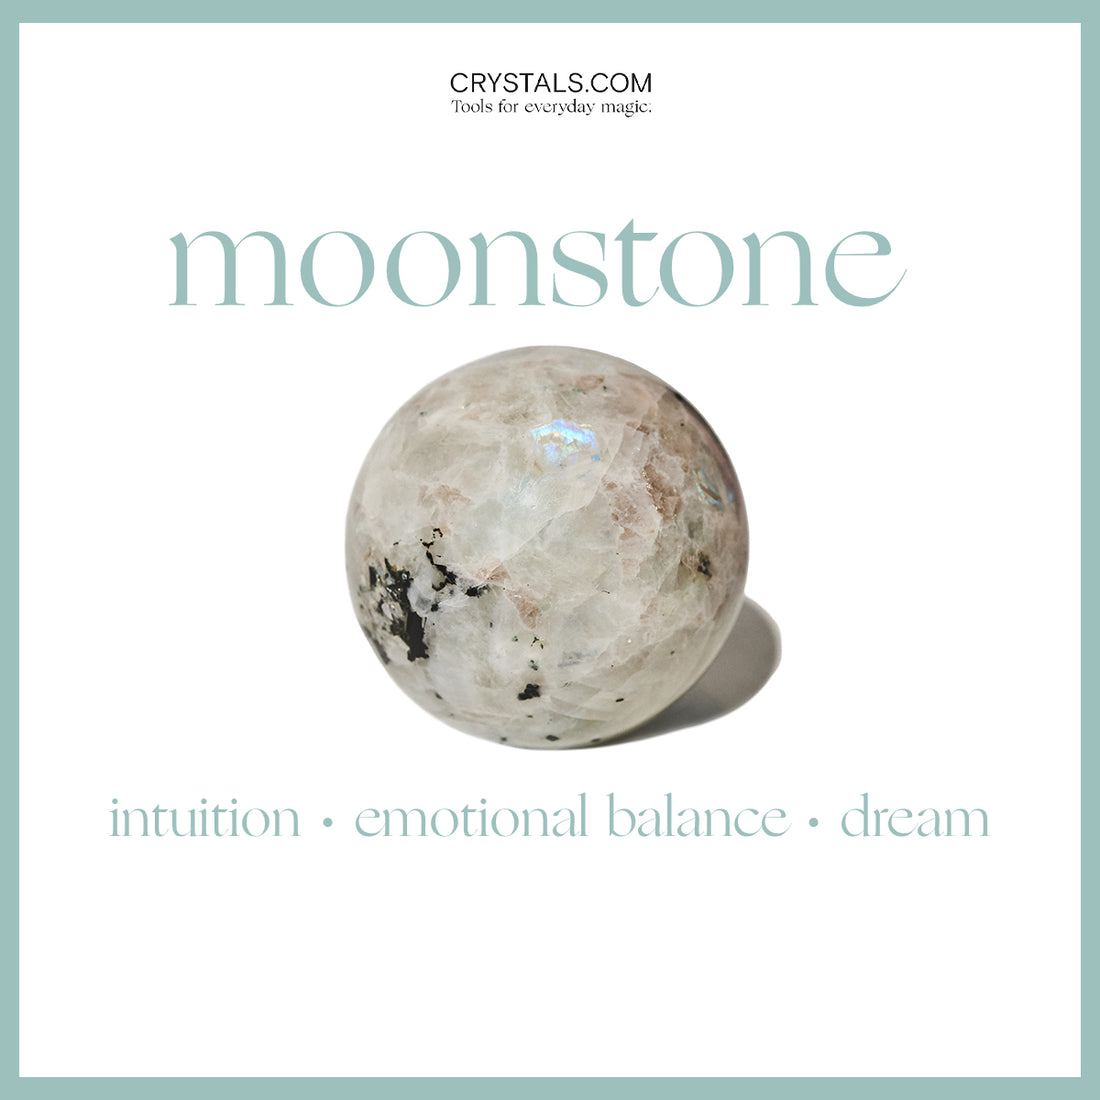 moonstone crystal meaning and uses